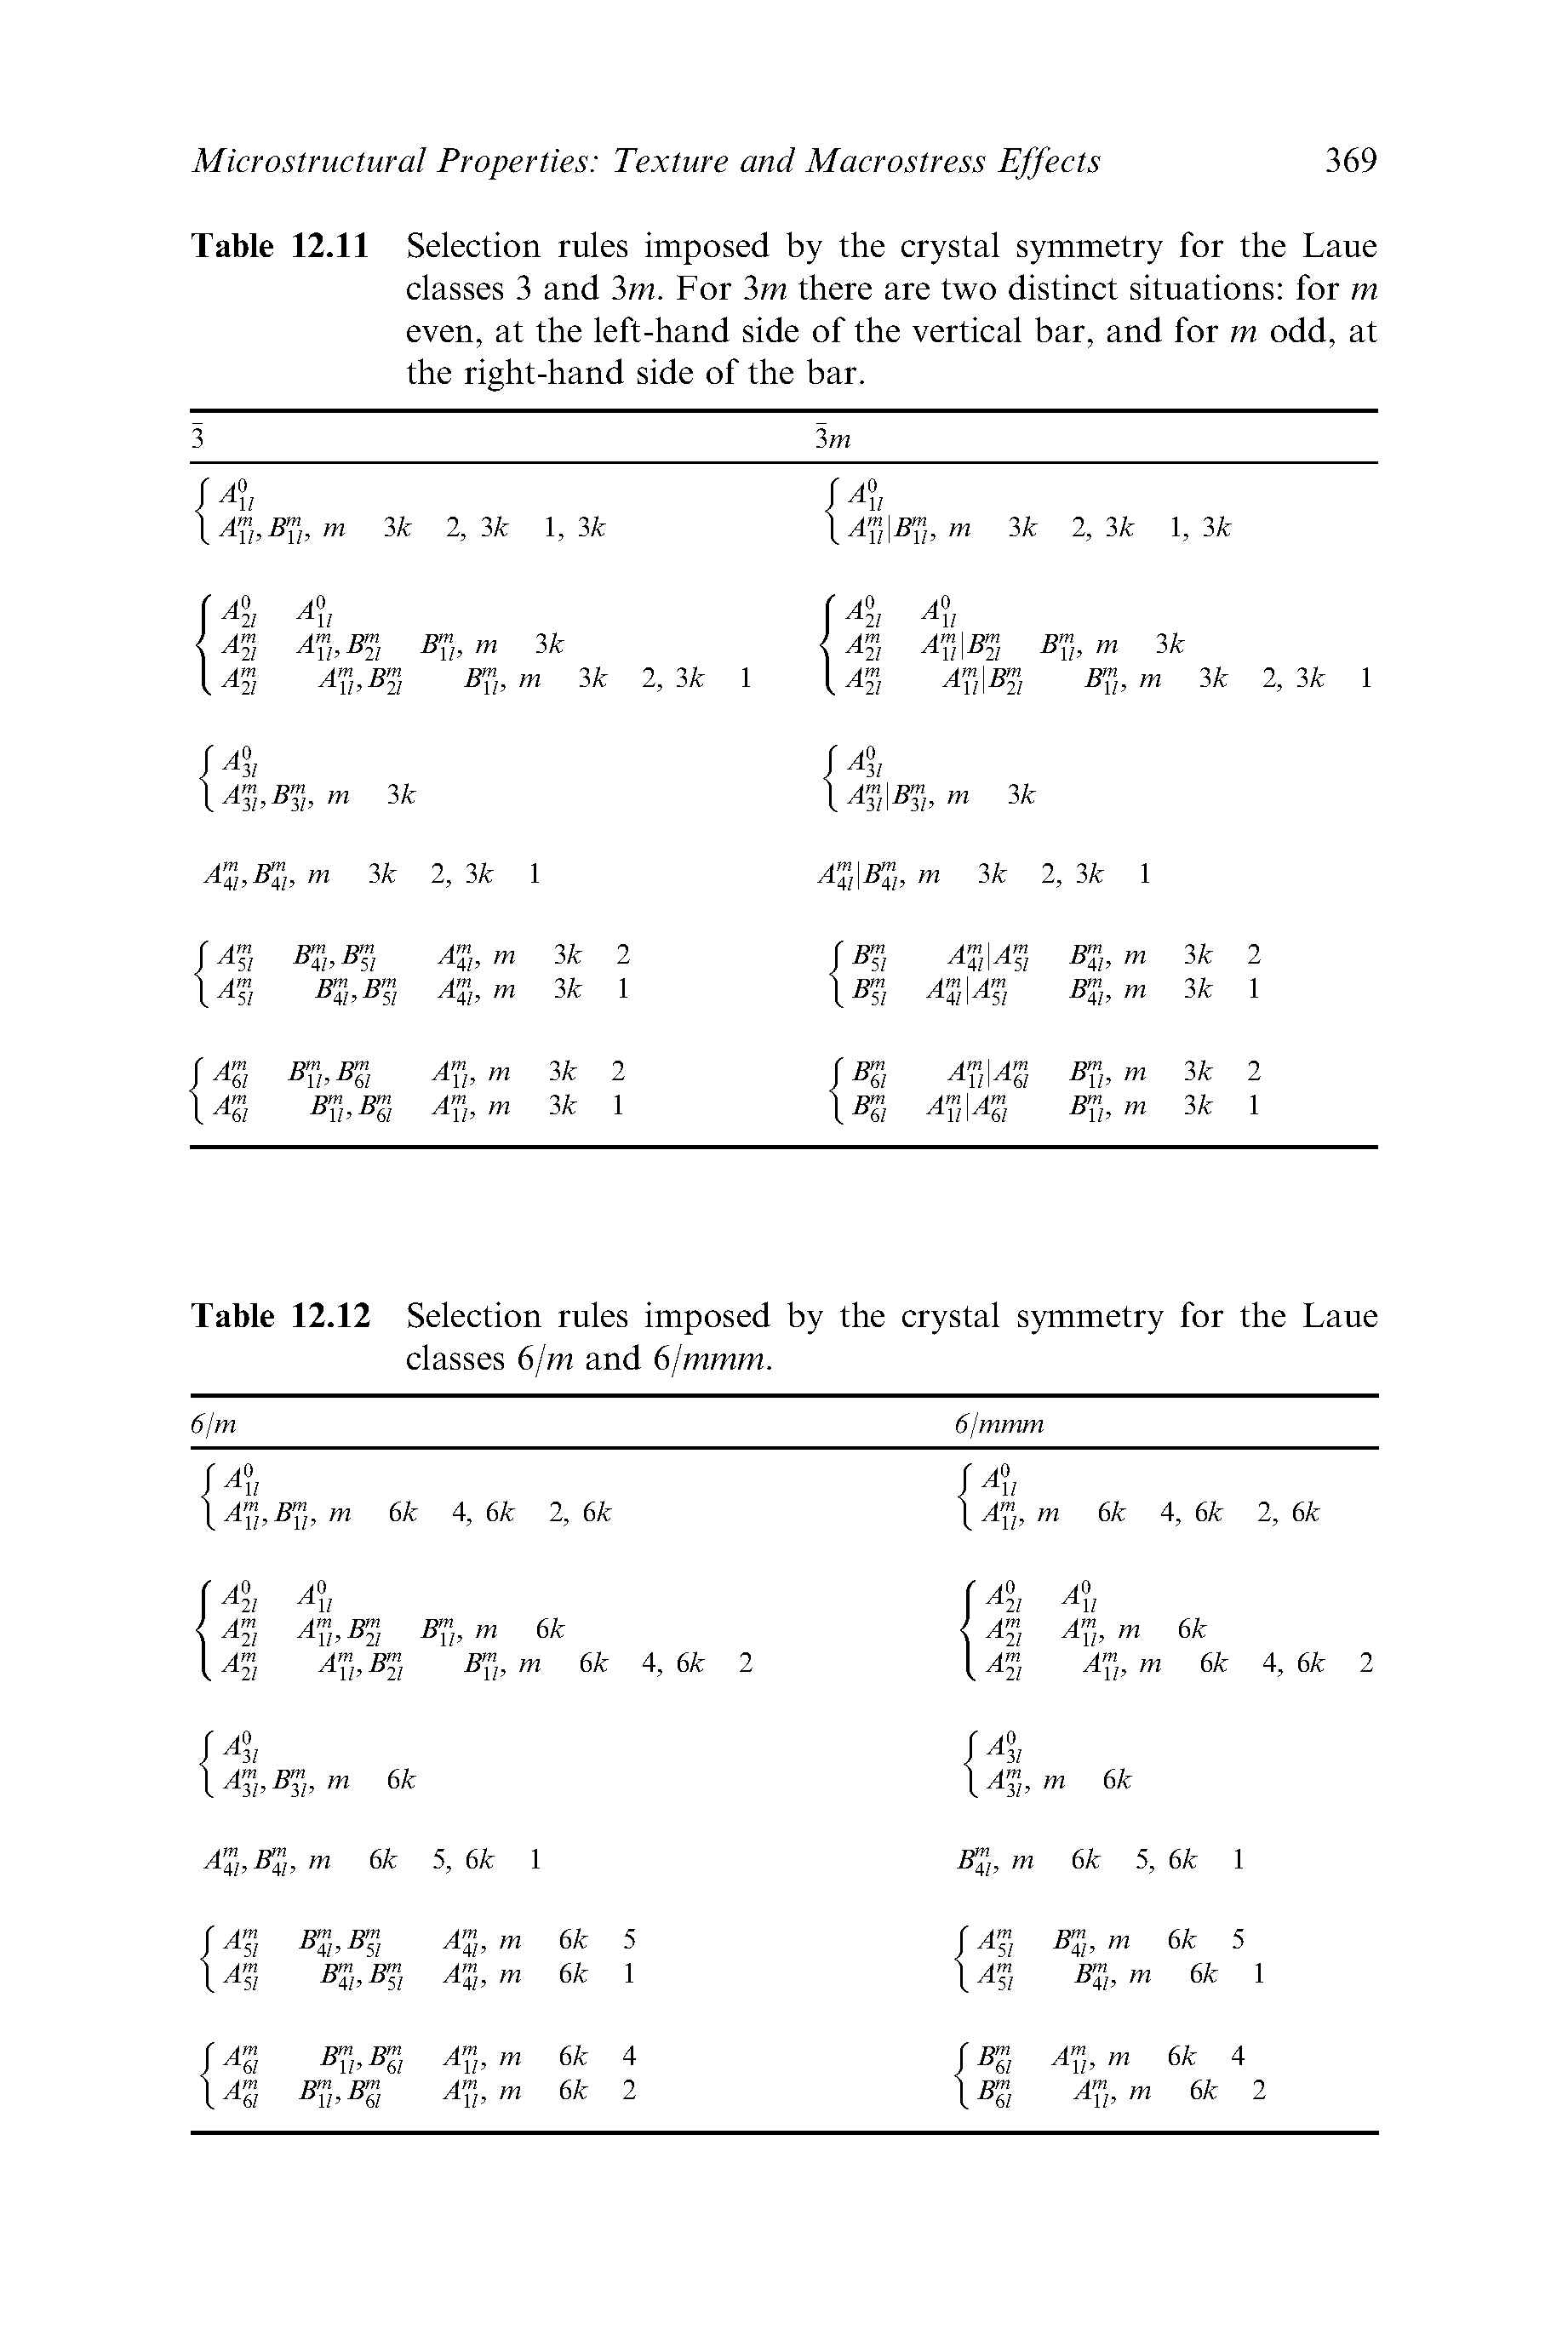 Table 12.11 Selection rules imposed by the crystal symmetry for the Laue classes 3 and 3m. For 3m there are two distinct situations for m even, at the left-hand side of the vertical bar, and for m odd, at the right-hand side of the bar.